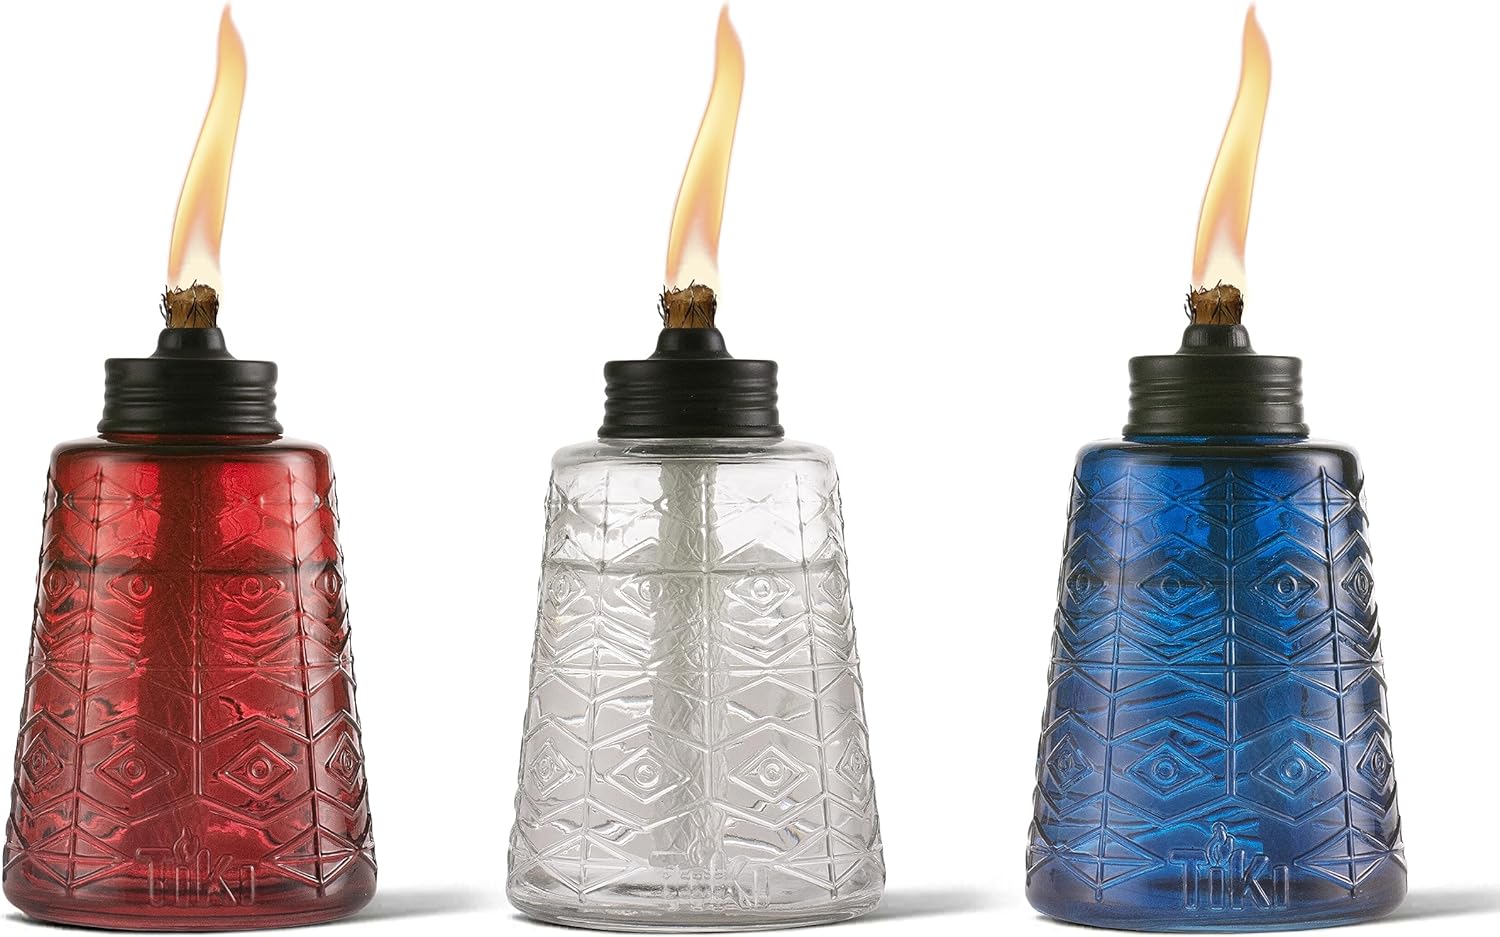 Perfect for the tiki fuel. Flames are high so be careful where you put it.